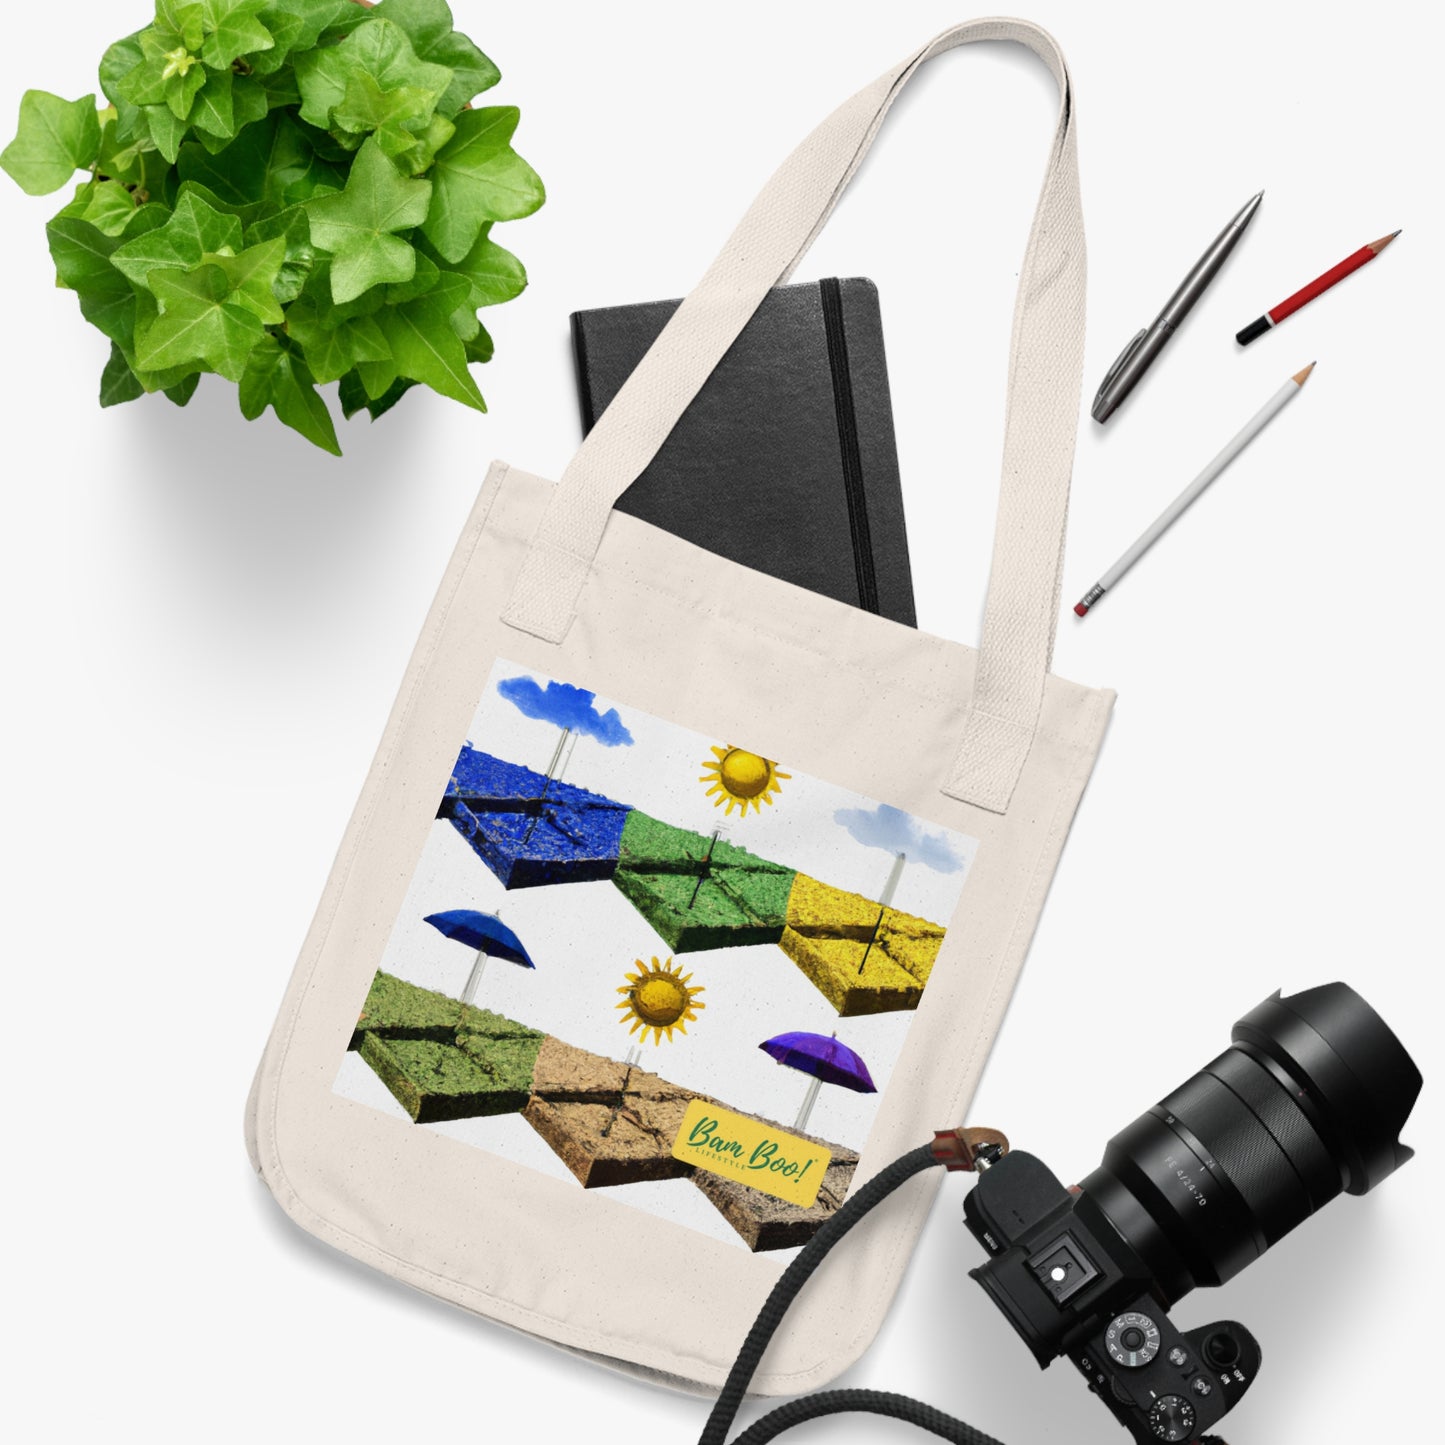 "Nature in Harmony: An Interplay of Elements in the Landscape" - Bam Boo! Lifestyle Eco-friendly Tote Bag